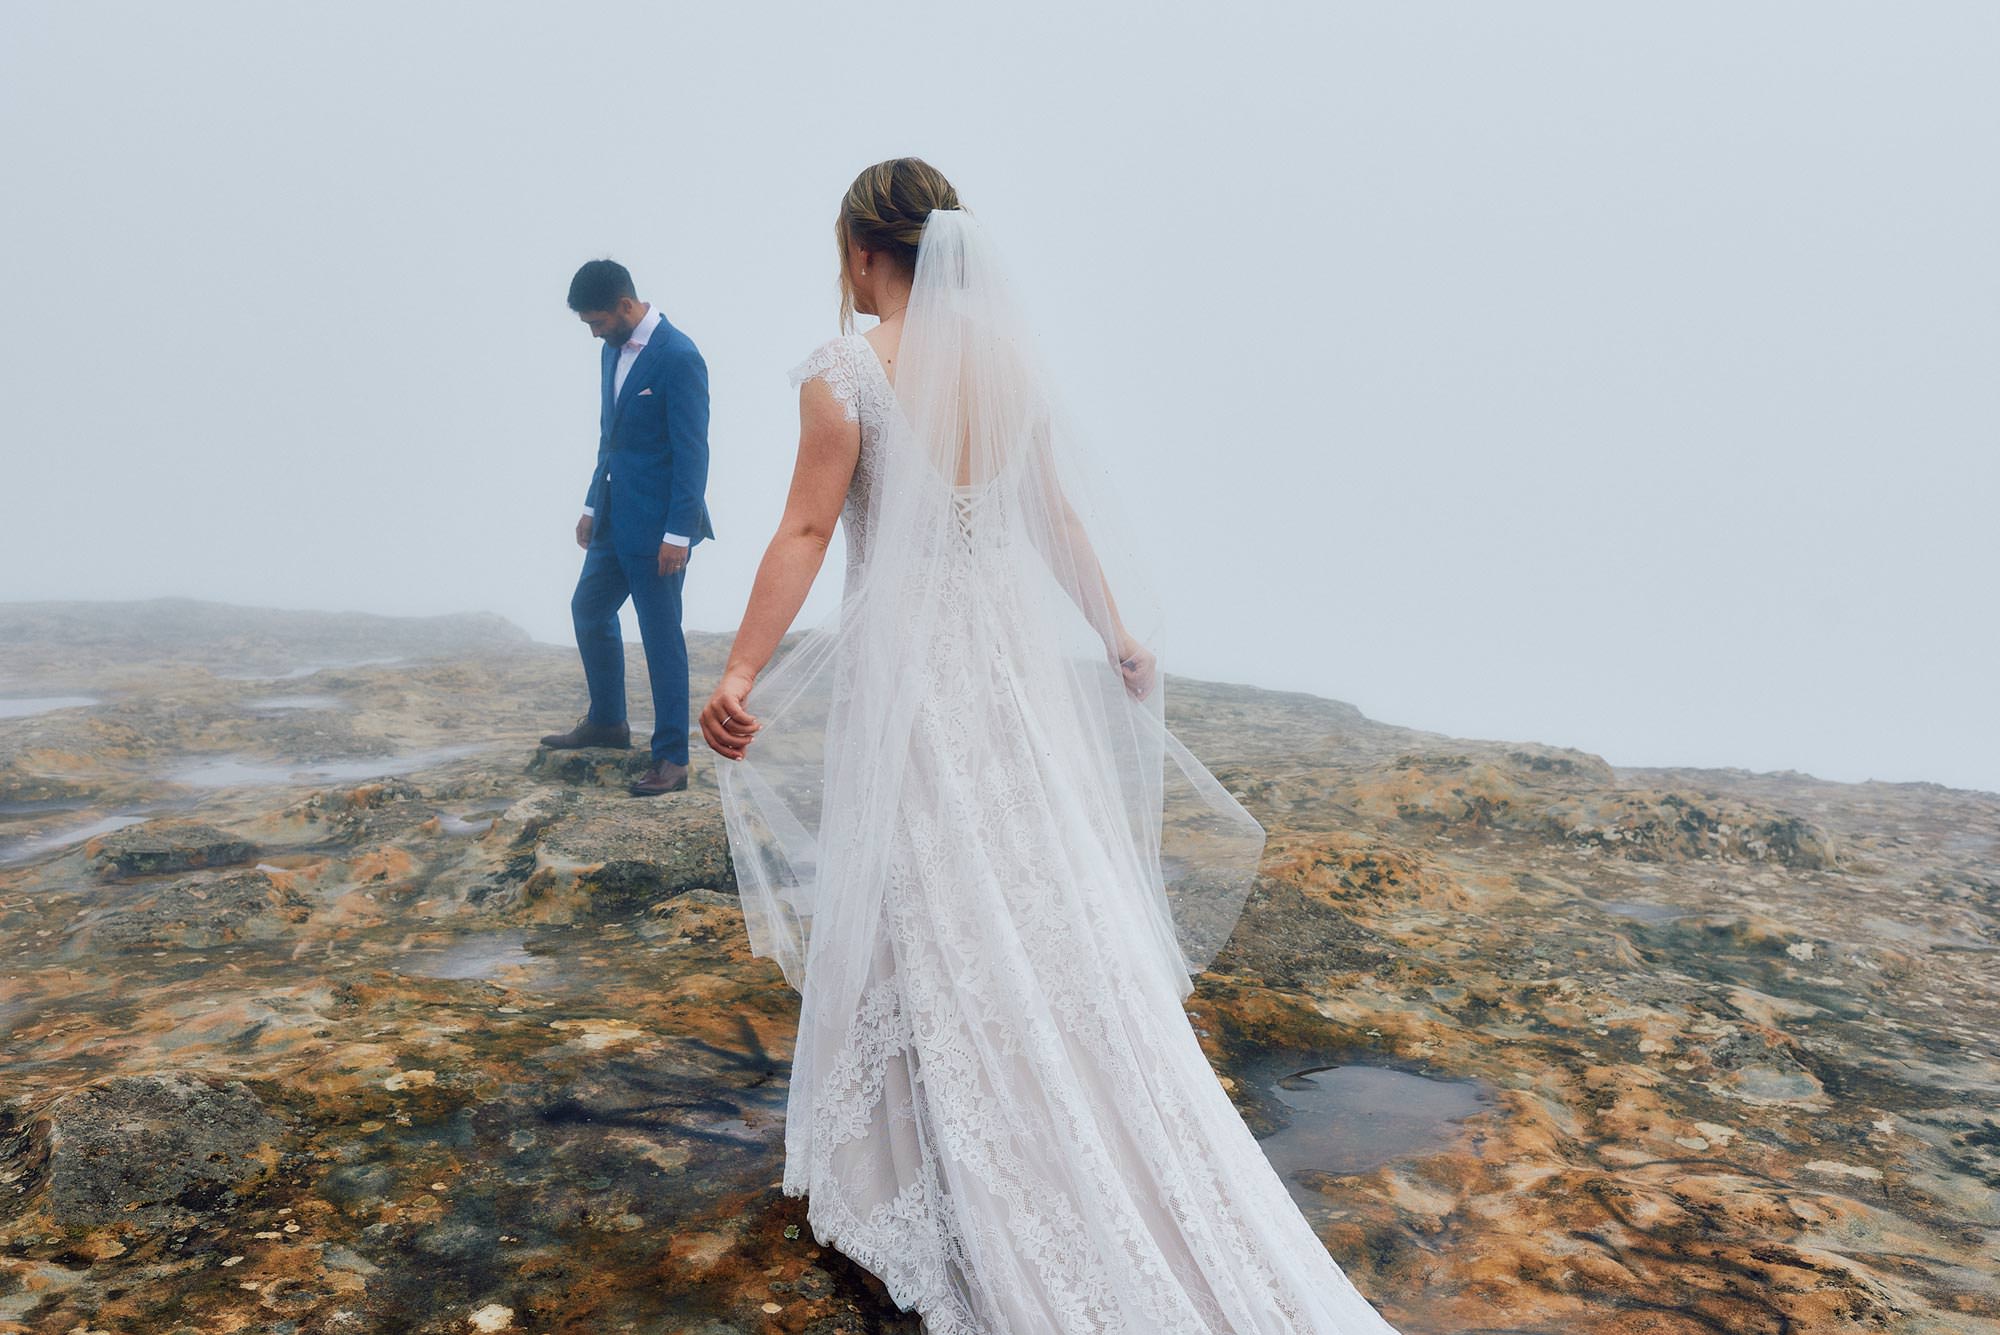 Bride and groom in the mist